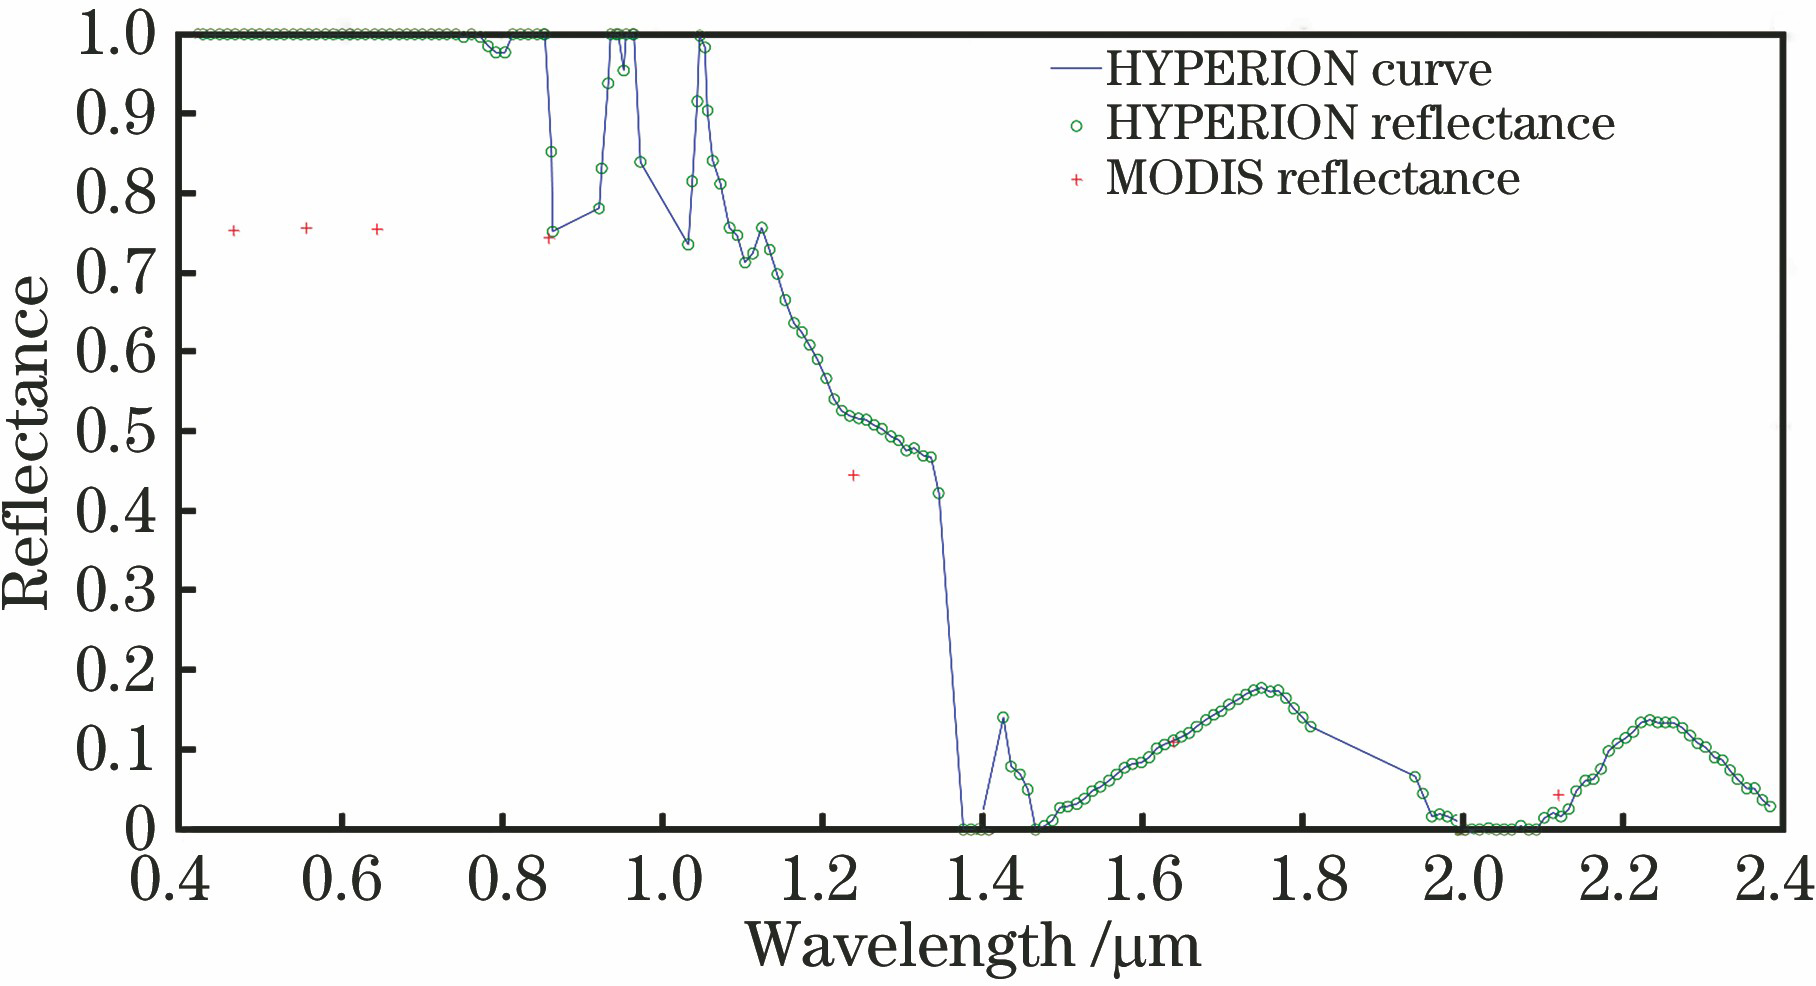 Snow reflectance of HYPERION and MODIS data